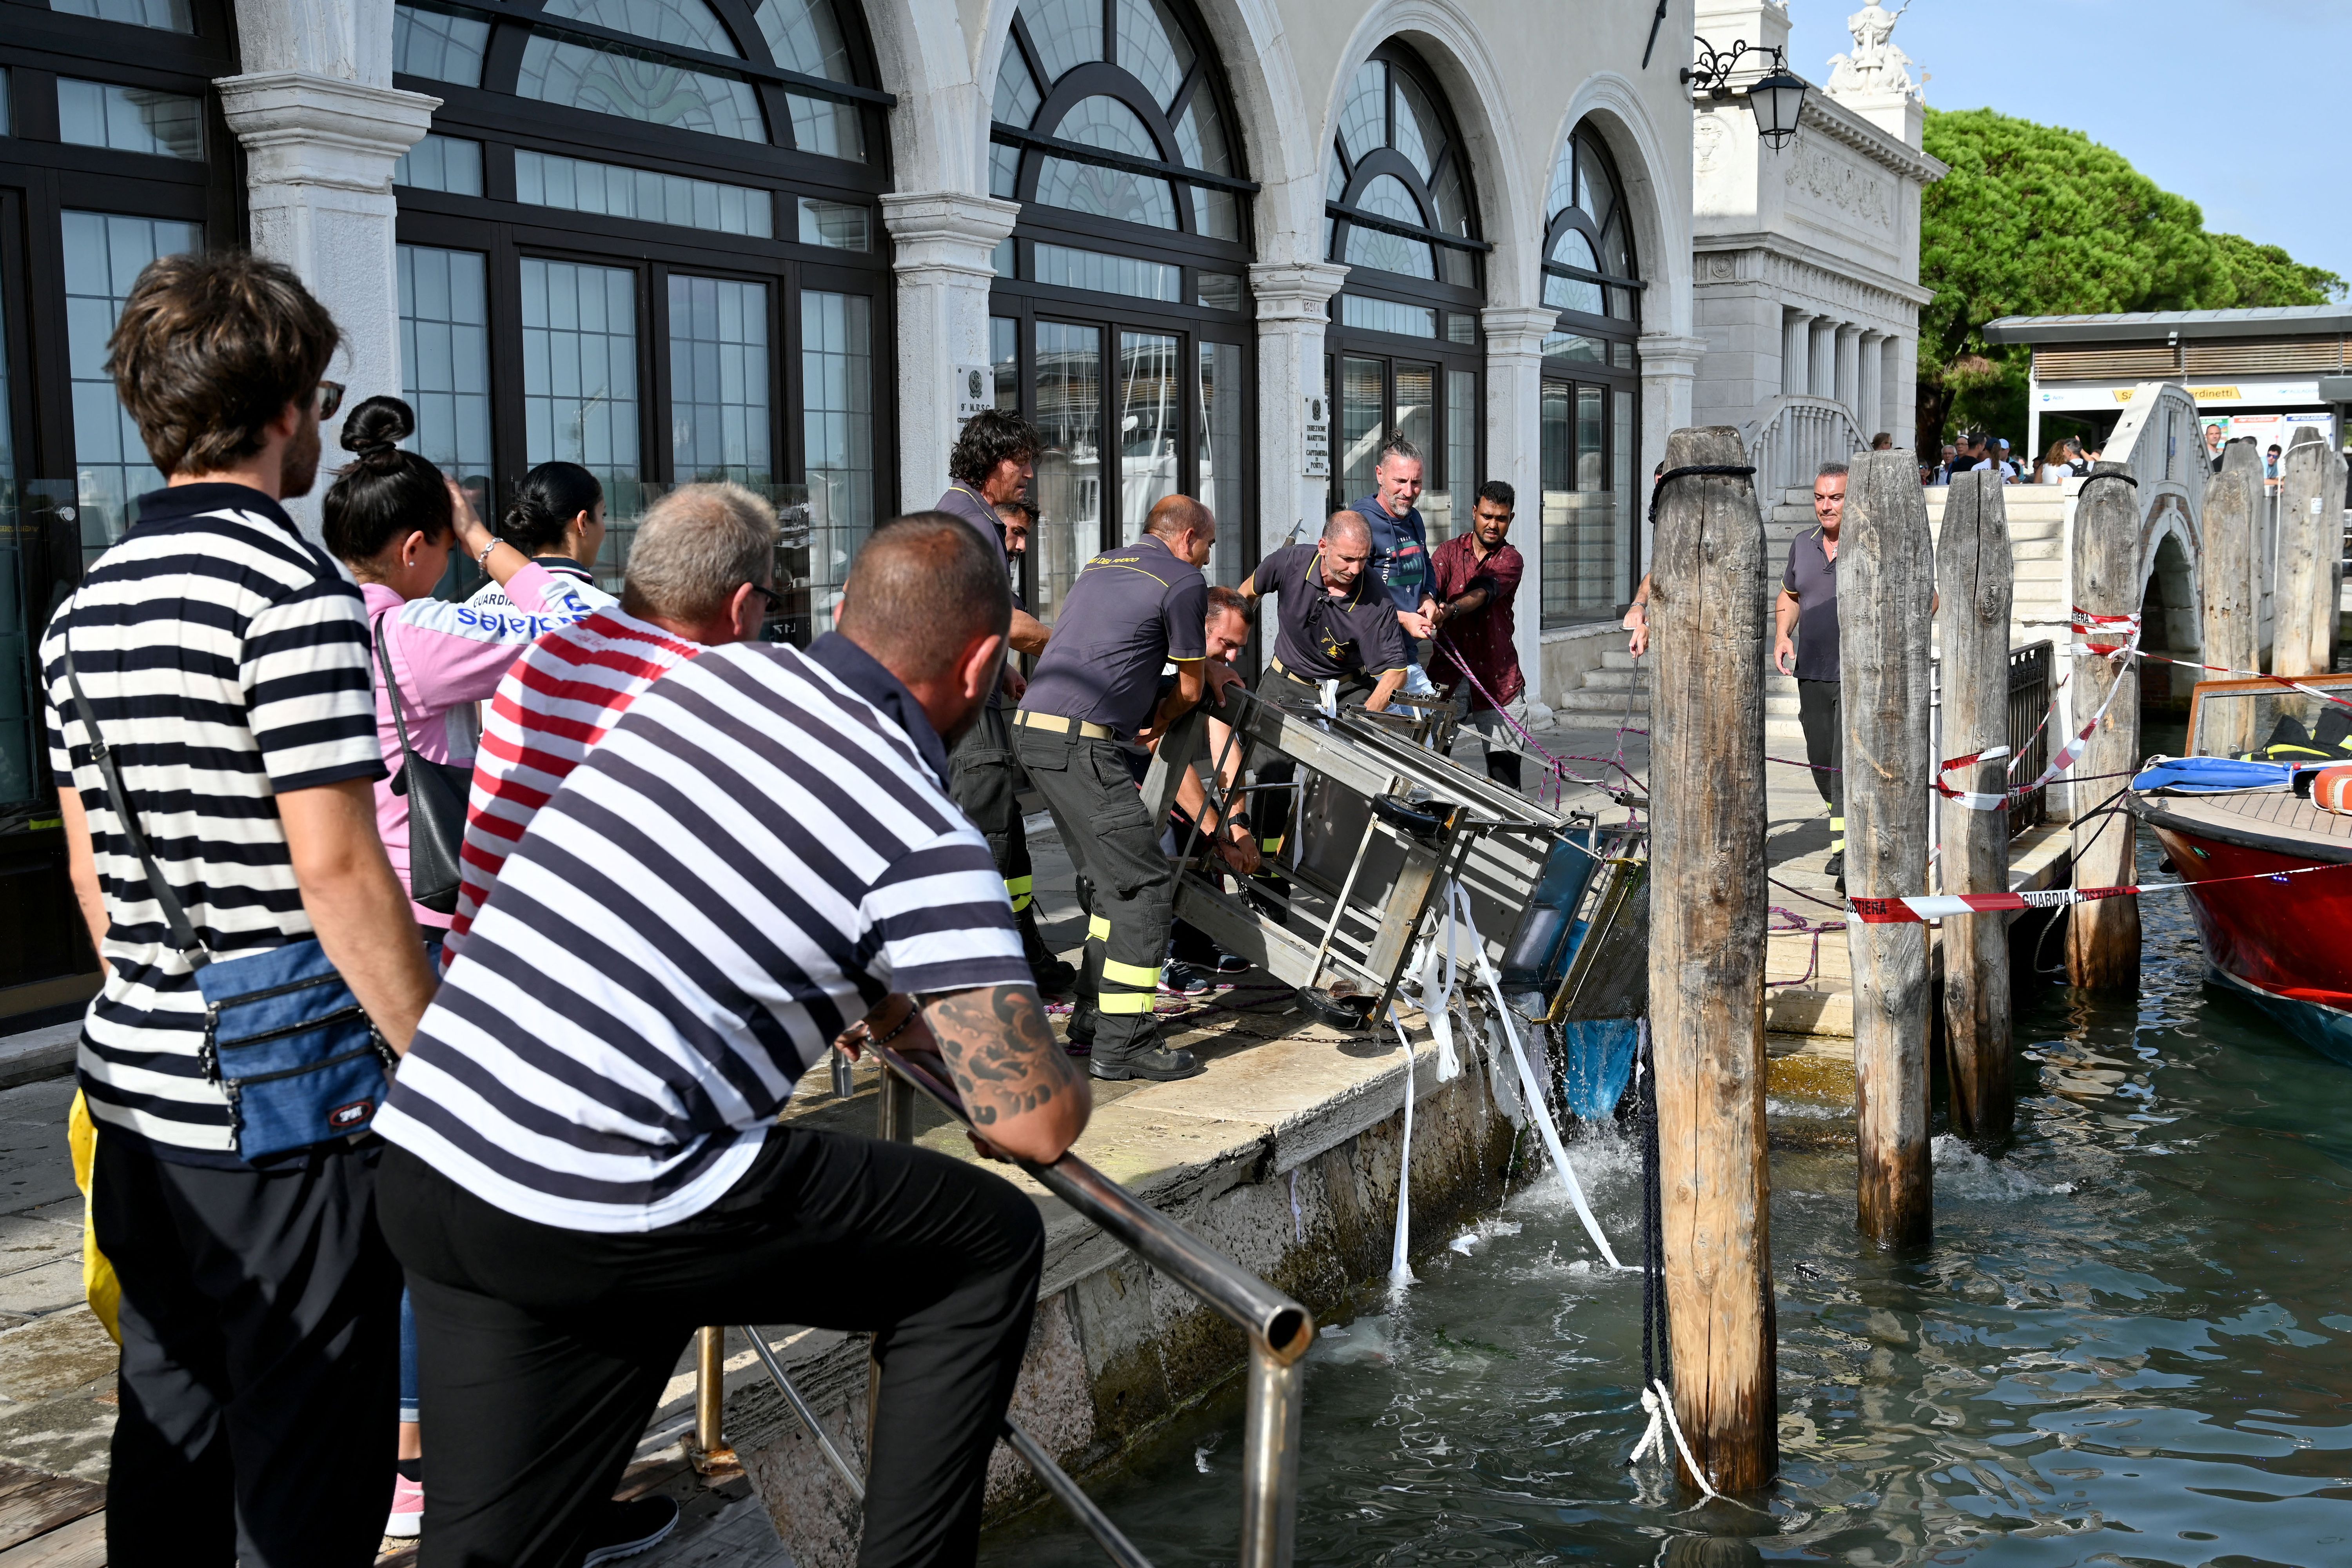 Firefighters recover a Souvenirs stall that ended up in the Grand Canal in Venice due to strong winds, on August 18.